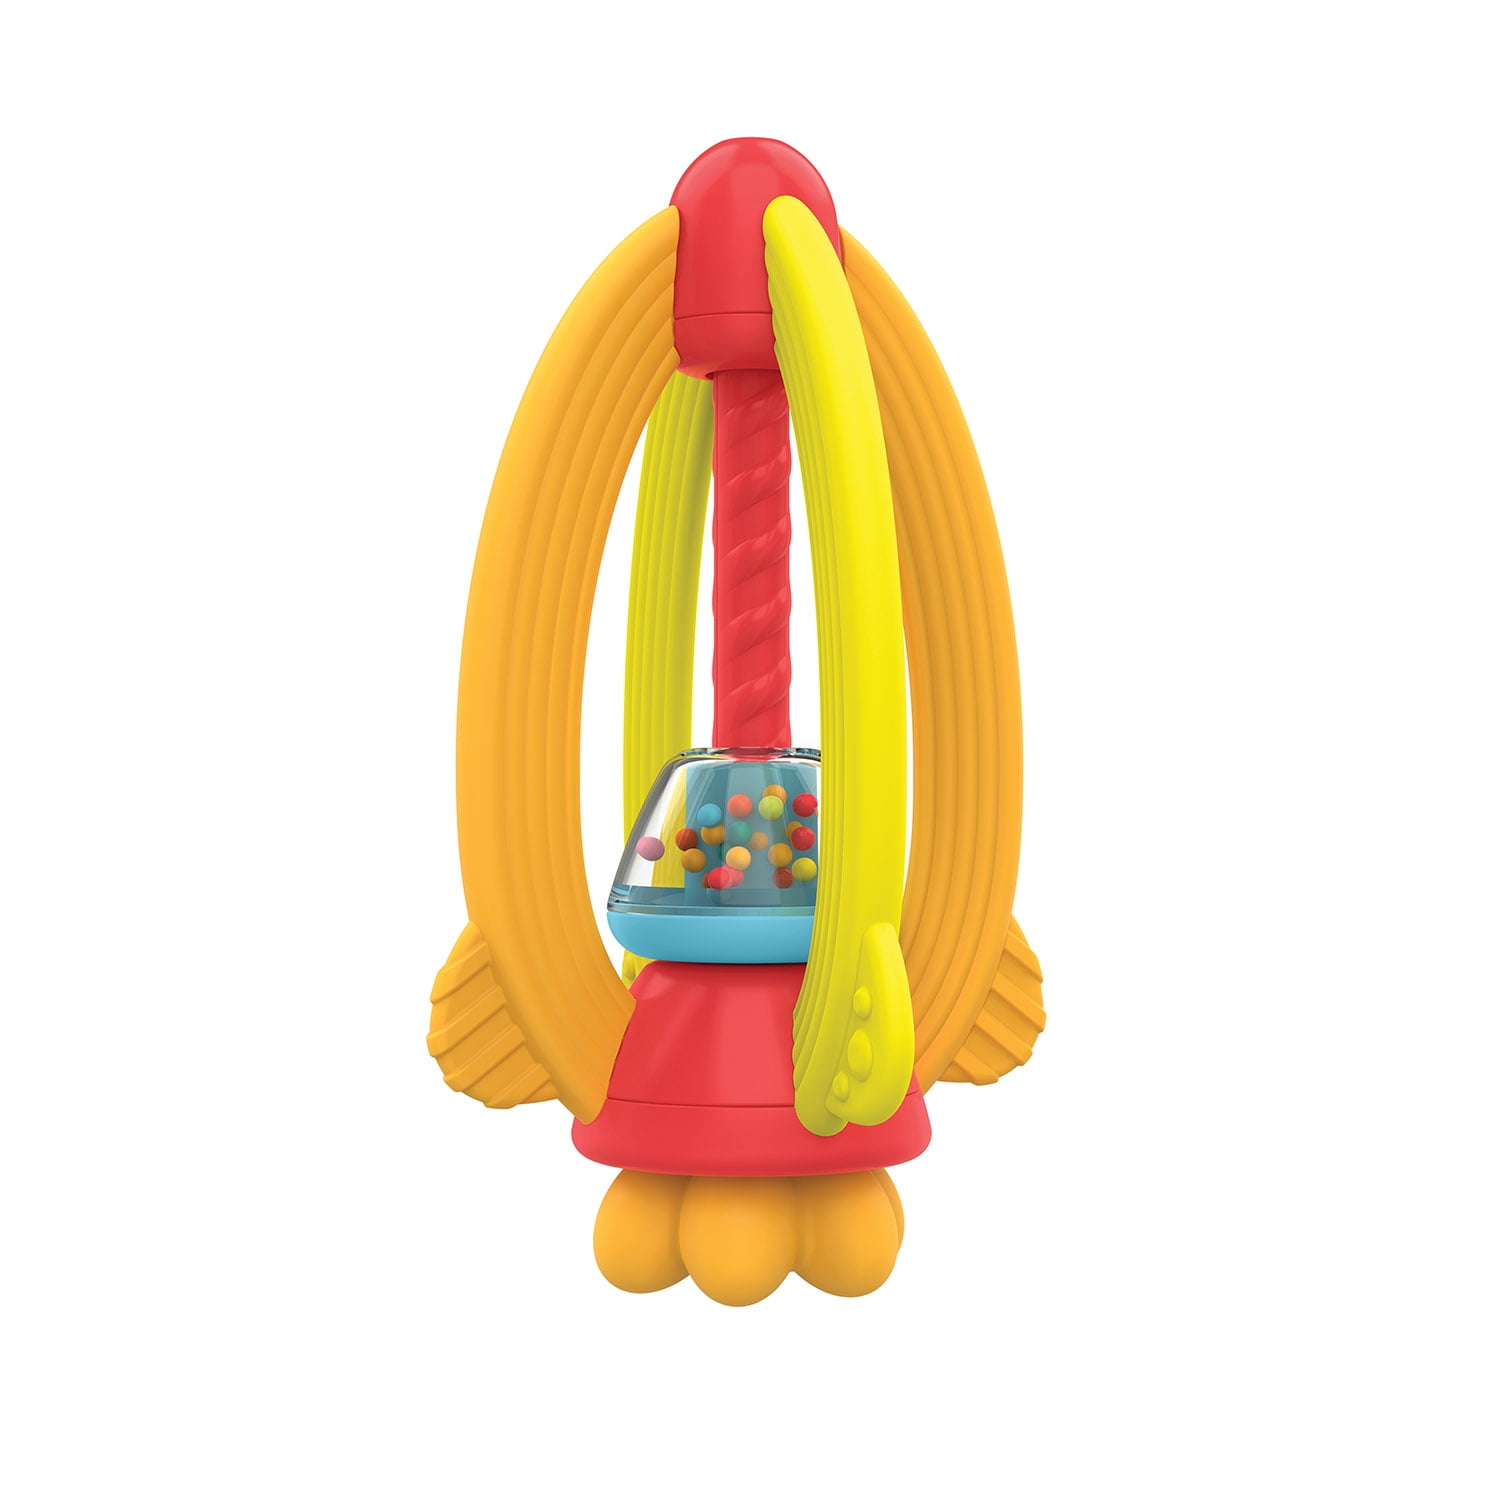 Sassy Toy Baby Kid Child ClanKing Rings Observe Rattle Phone Pretended Play Toys 